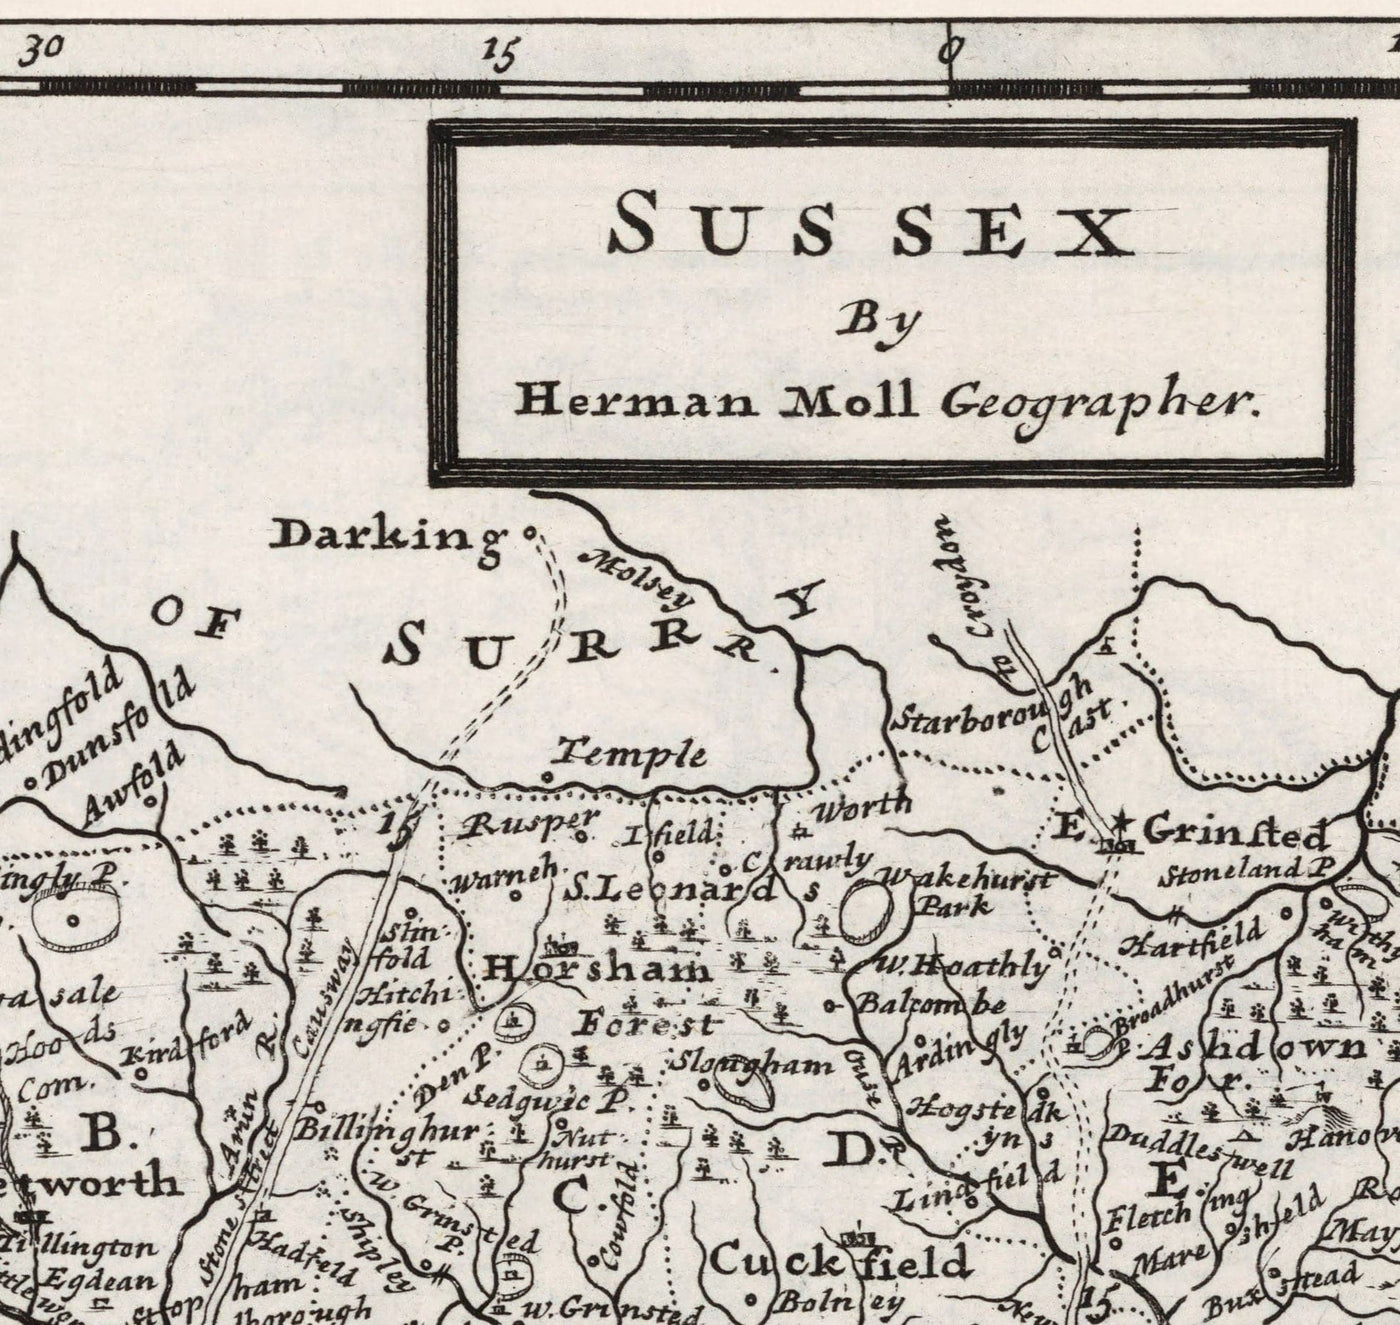 Old Map of Sussex 1724, by Herman Moll - Worthing, Crawley, Brighton, Bognor, Eastbourne